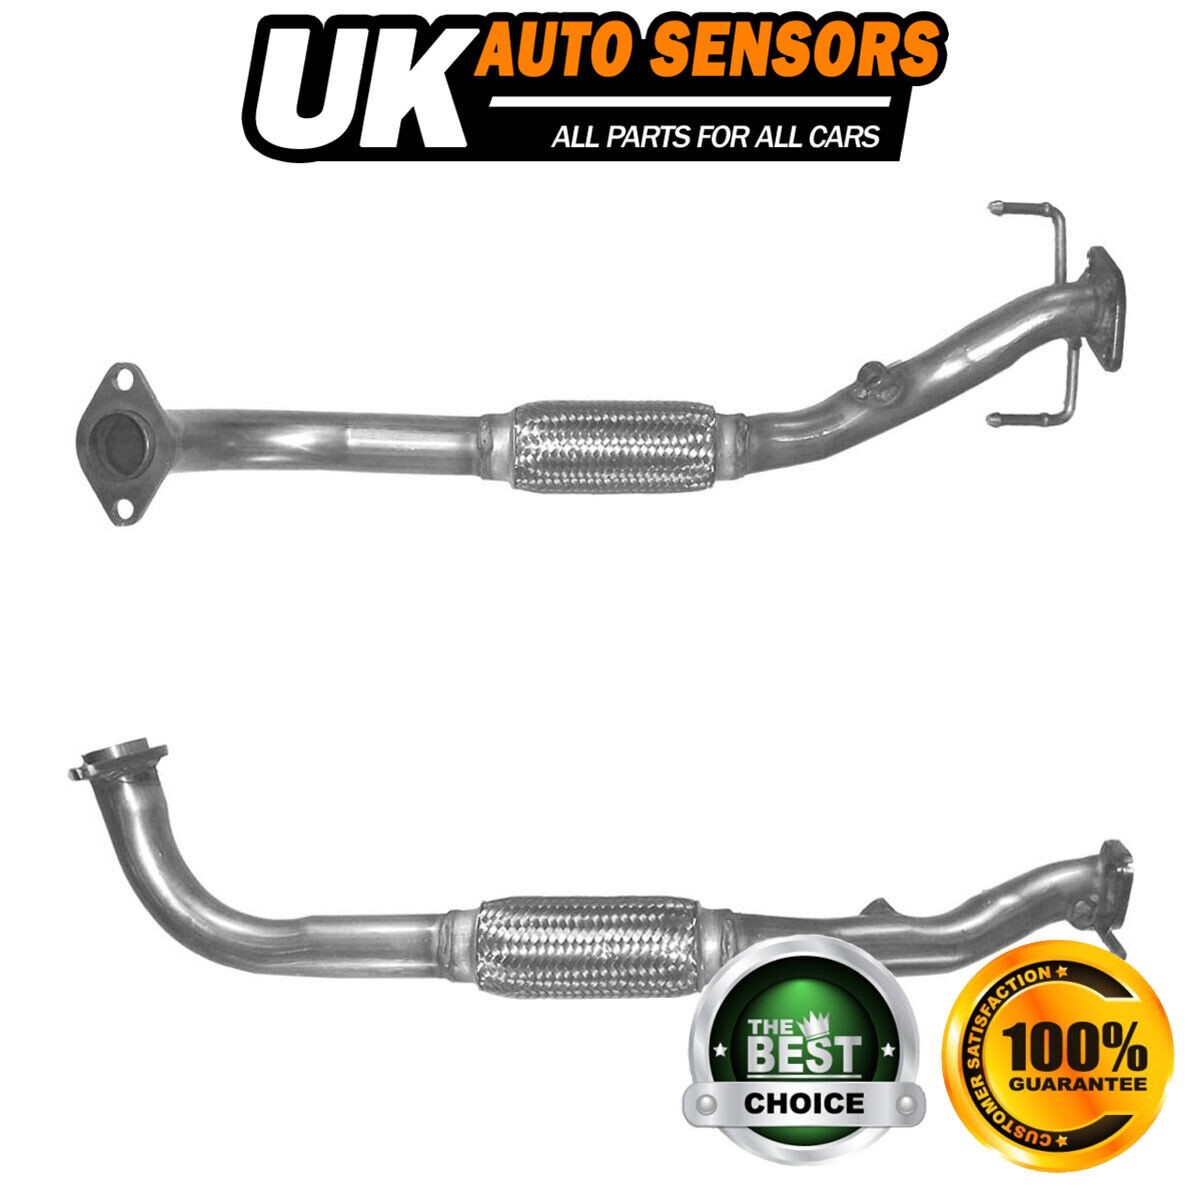 Fits Proton Satria 1996-2000 1.6 + Other Models Exhaust Pipe Euro 2 Front AST